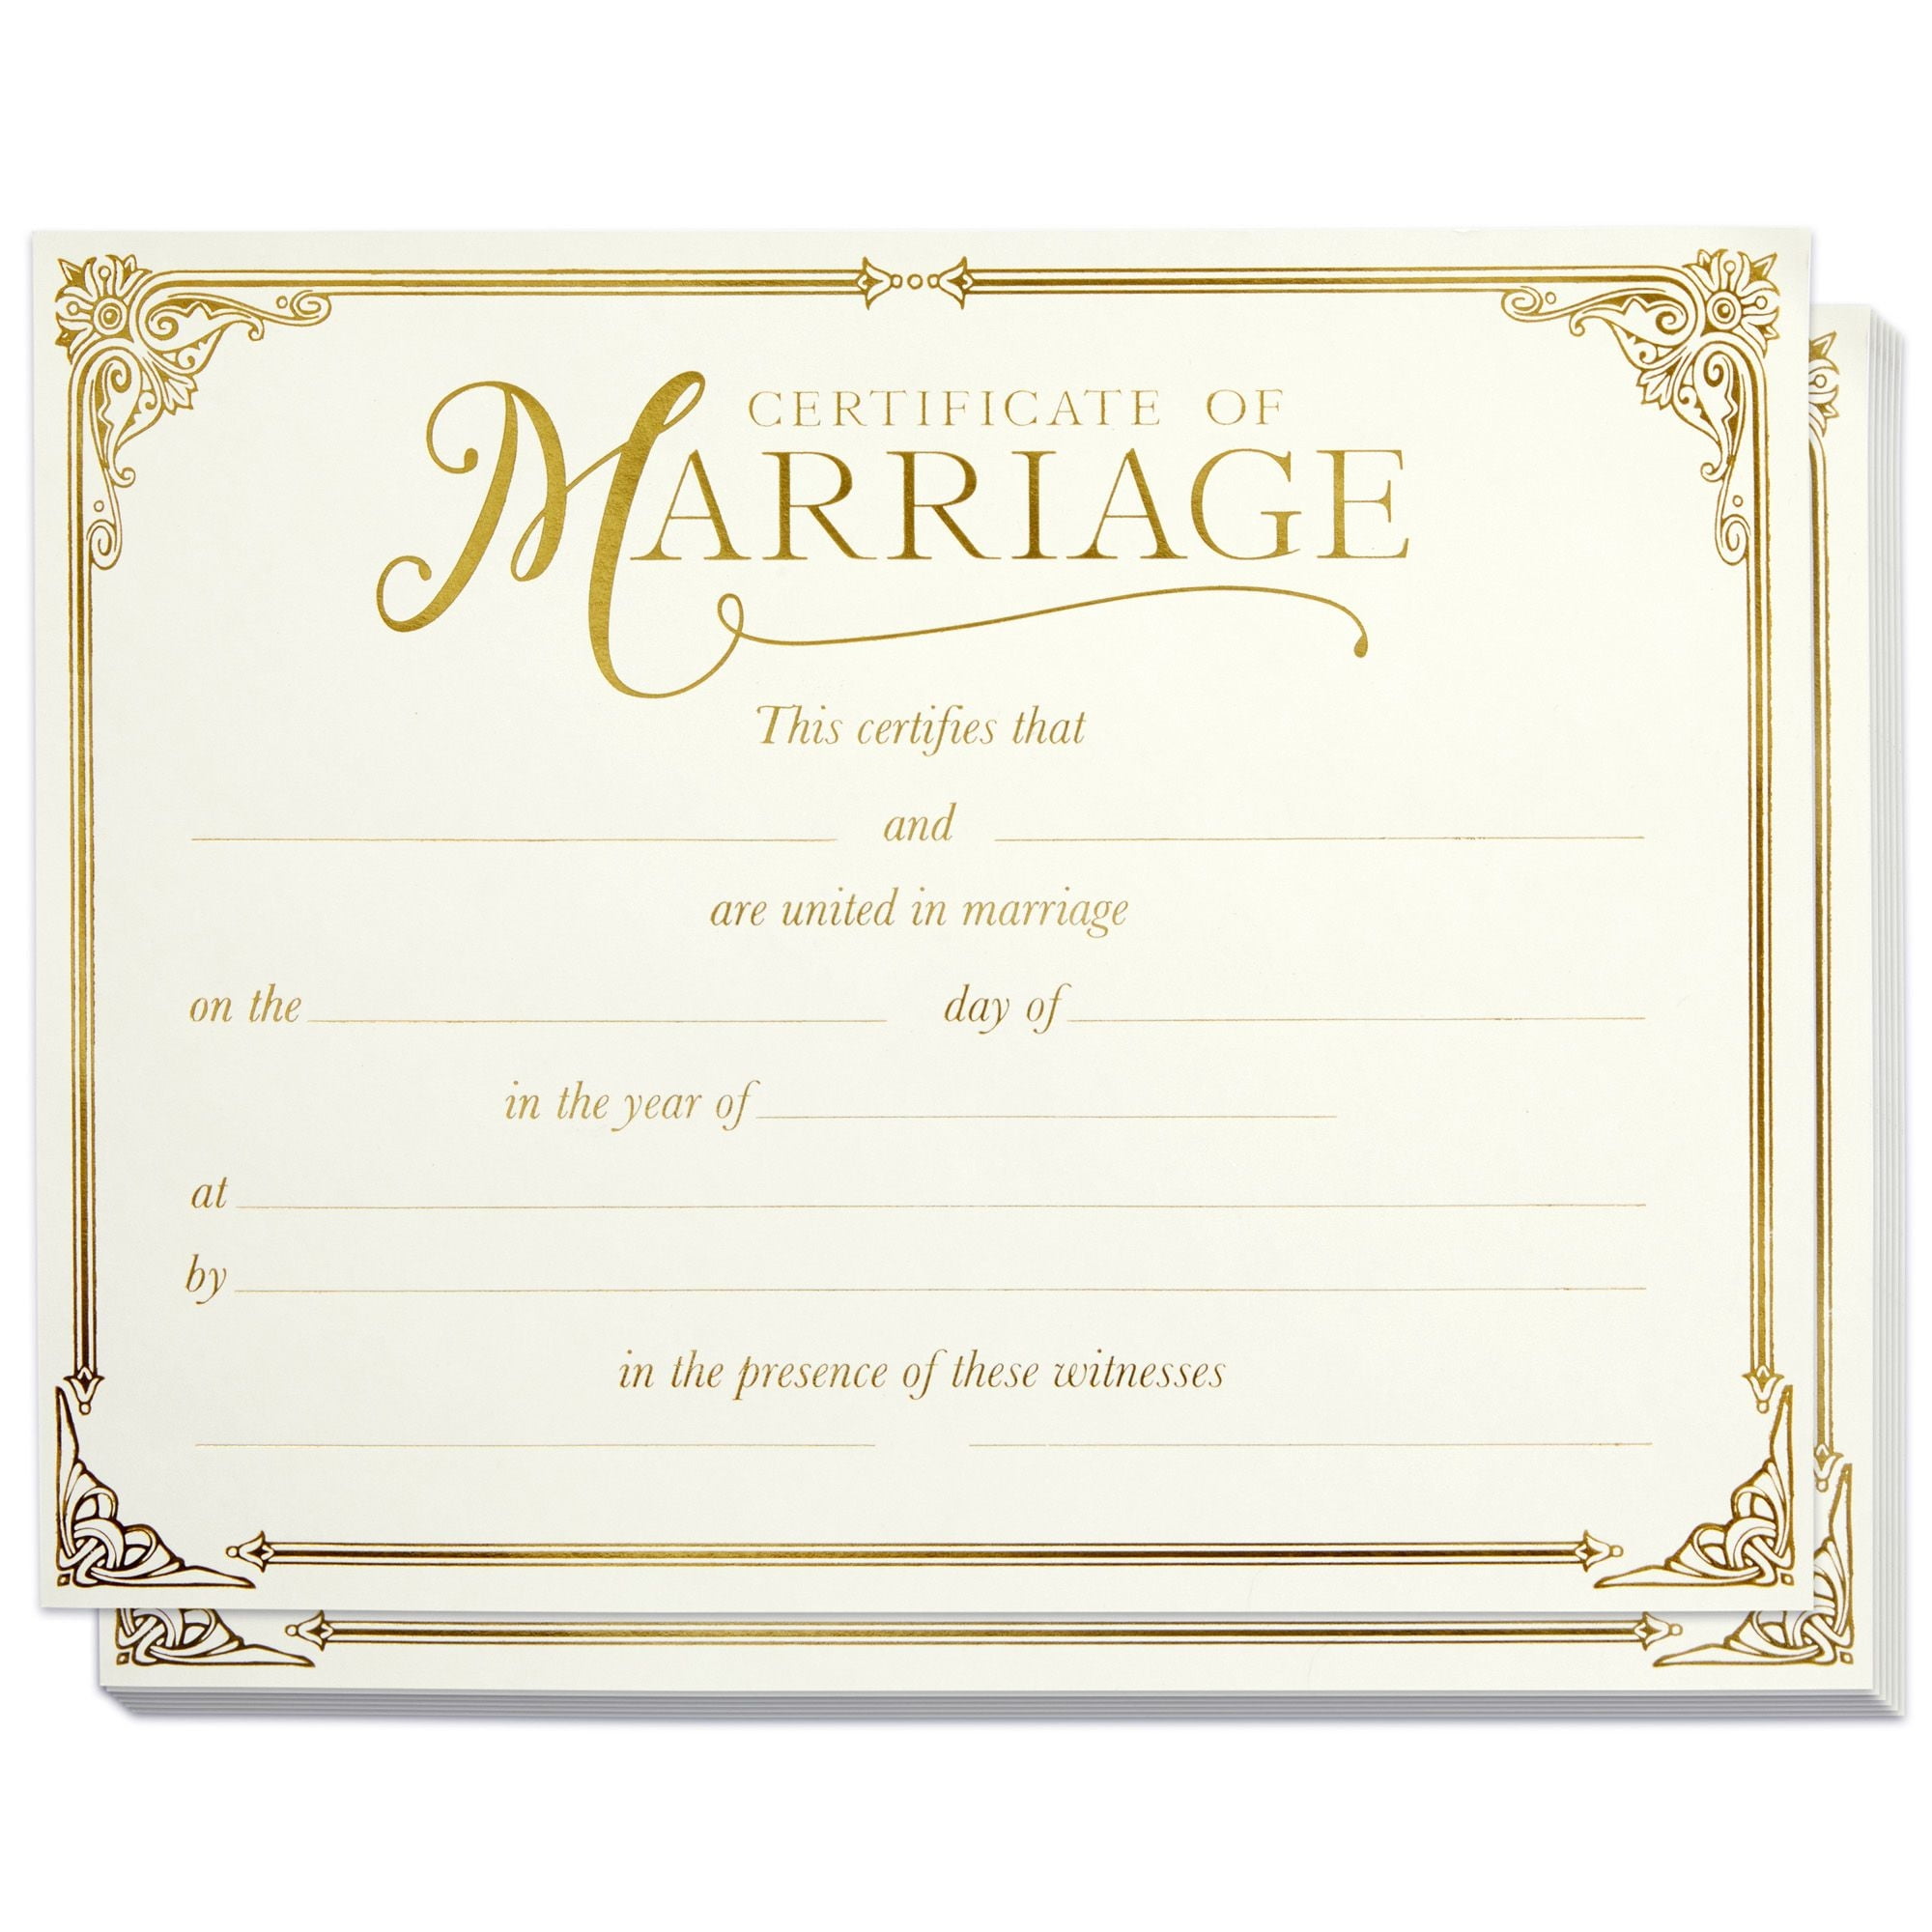 blank-fillable-marriage-certificate-format-doc-formats-certificate